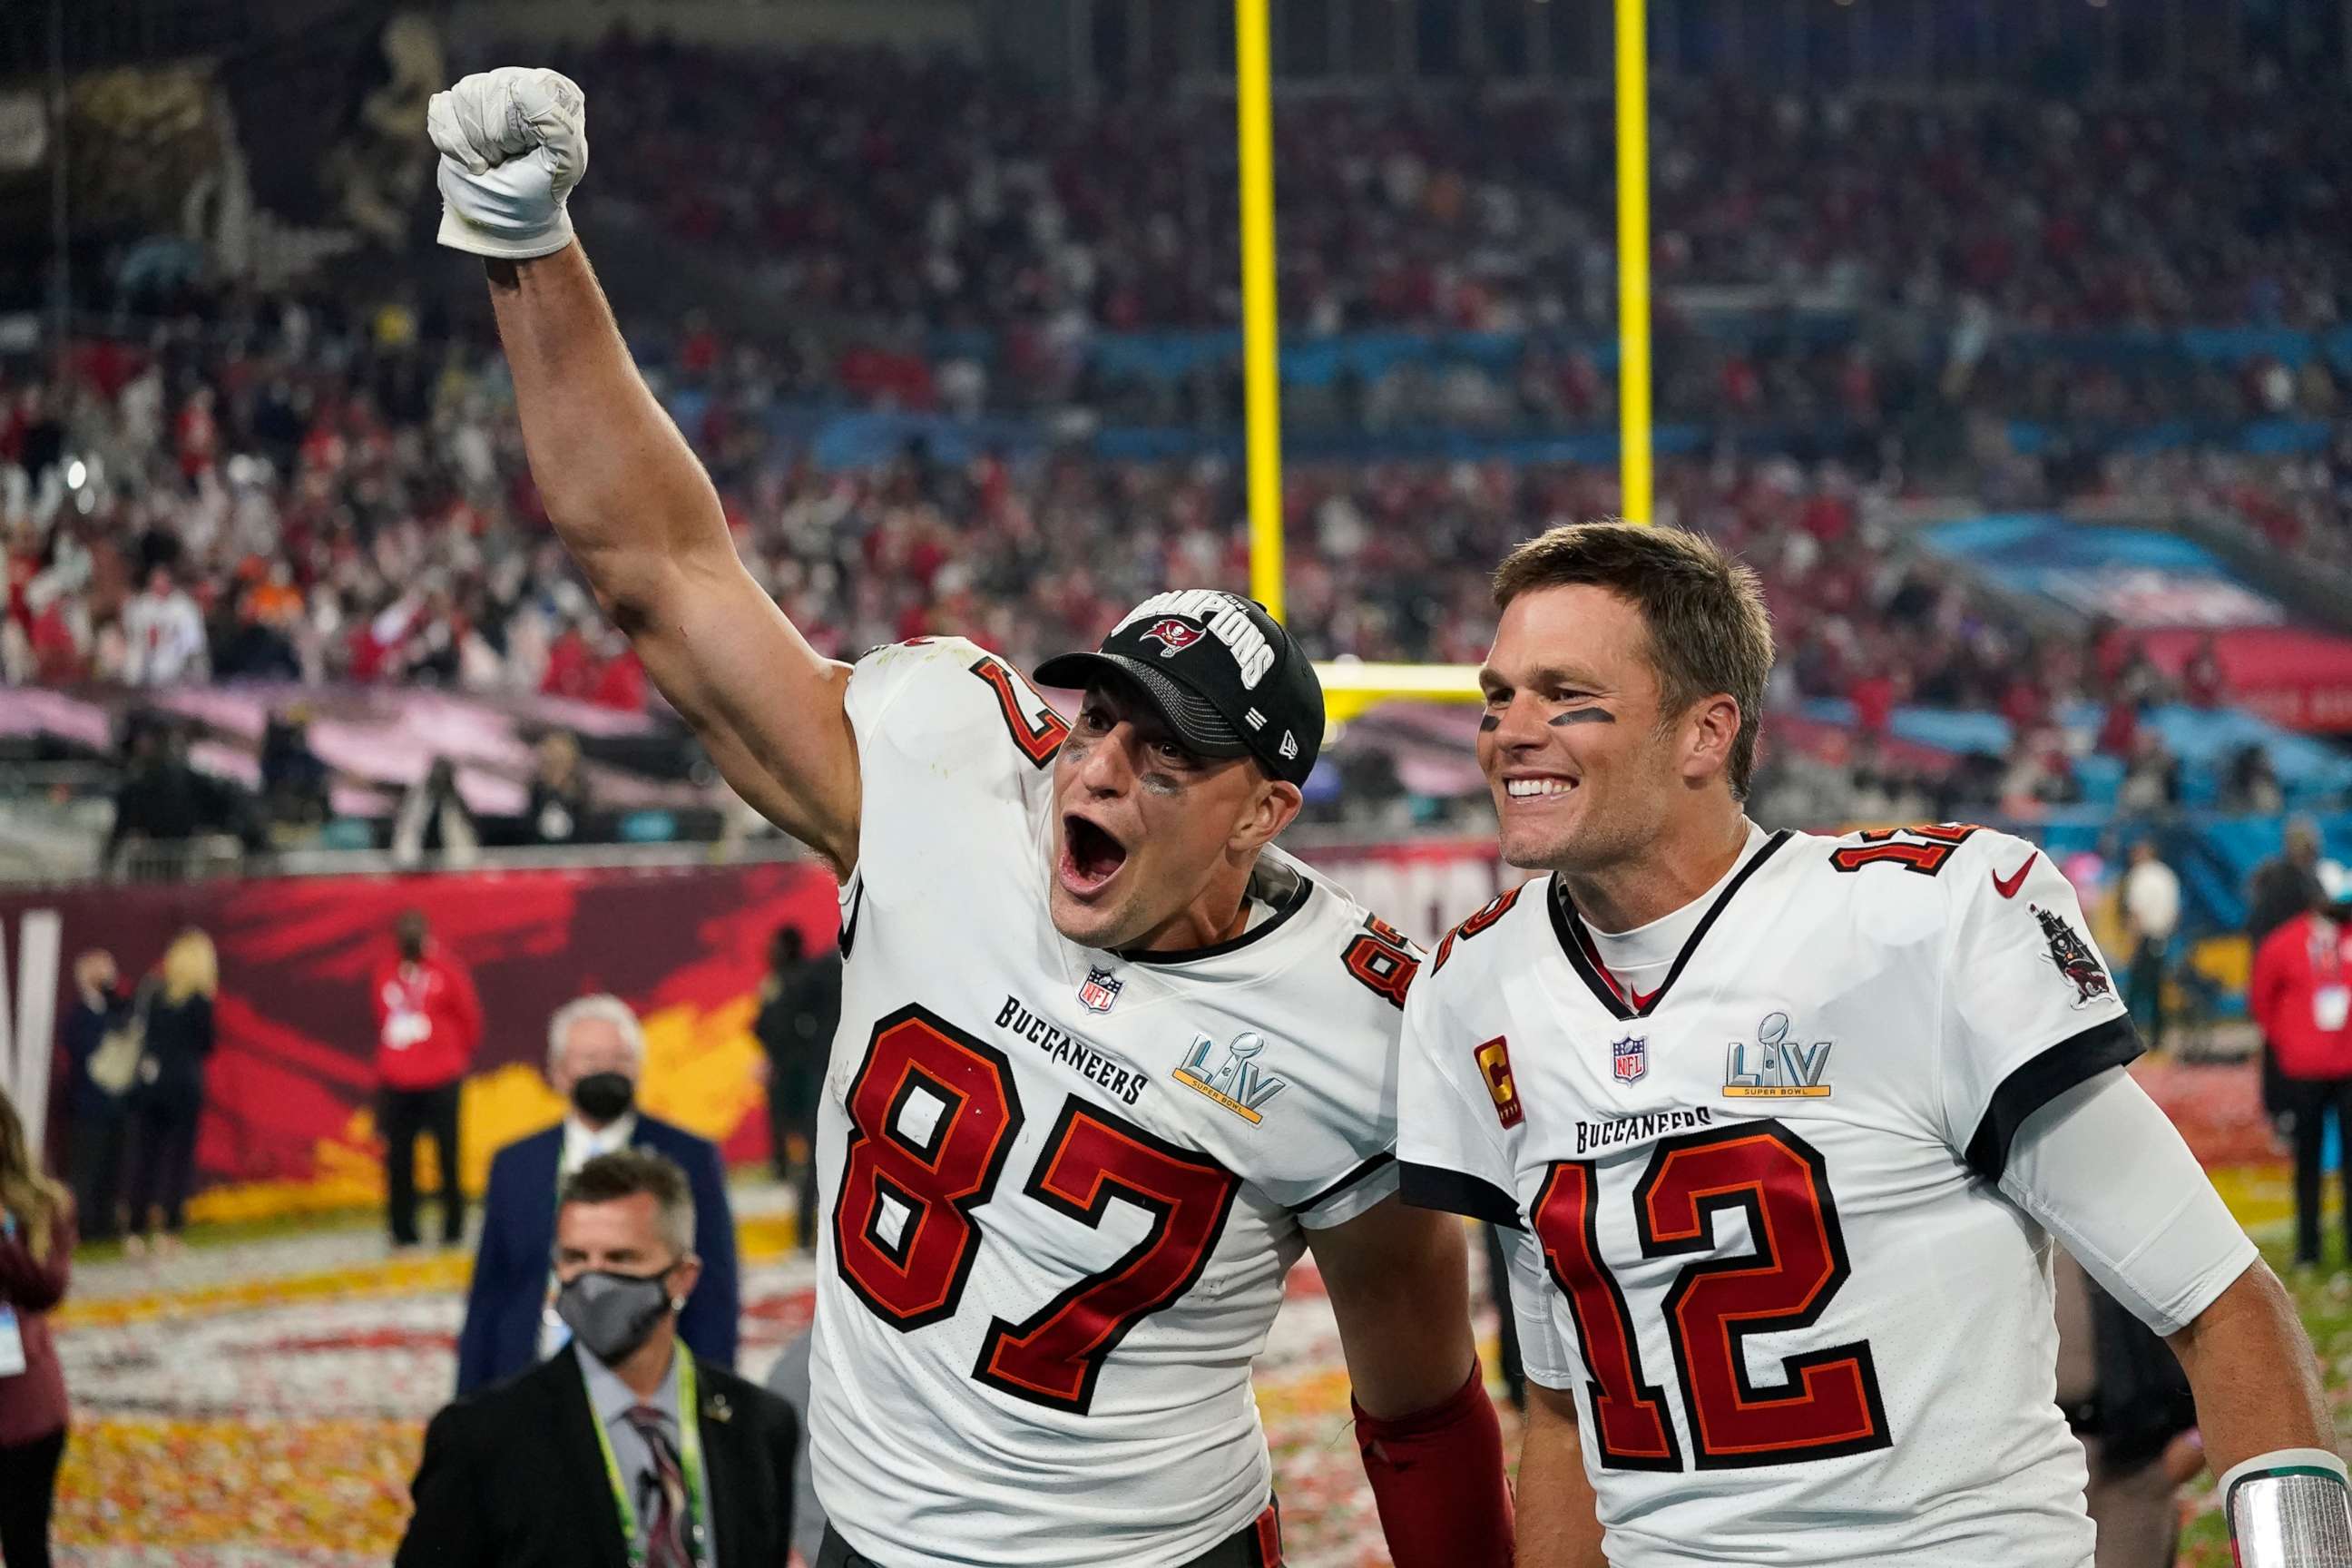 PHOTO: Tampa Bay Buccaneers tight end Rob Gronkowski, left, and quarterback Tom Brady celebrate after defeating the Kansas City Chiefs in the NFL Super Bowl 55 football game, Feb. 7, 2021, in Tampa, Fla.